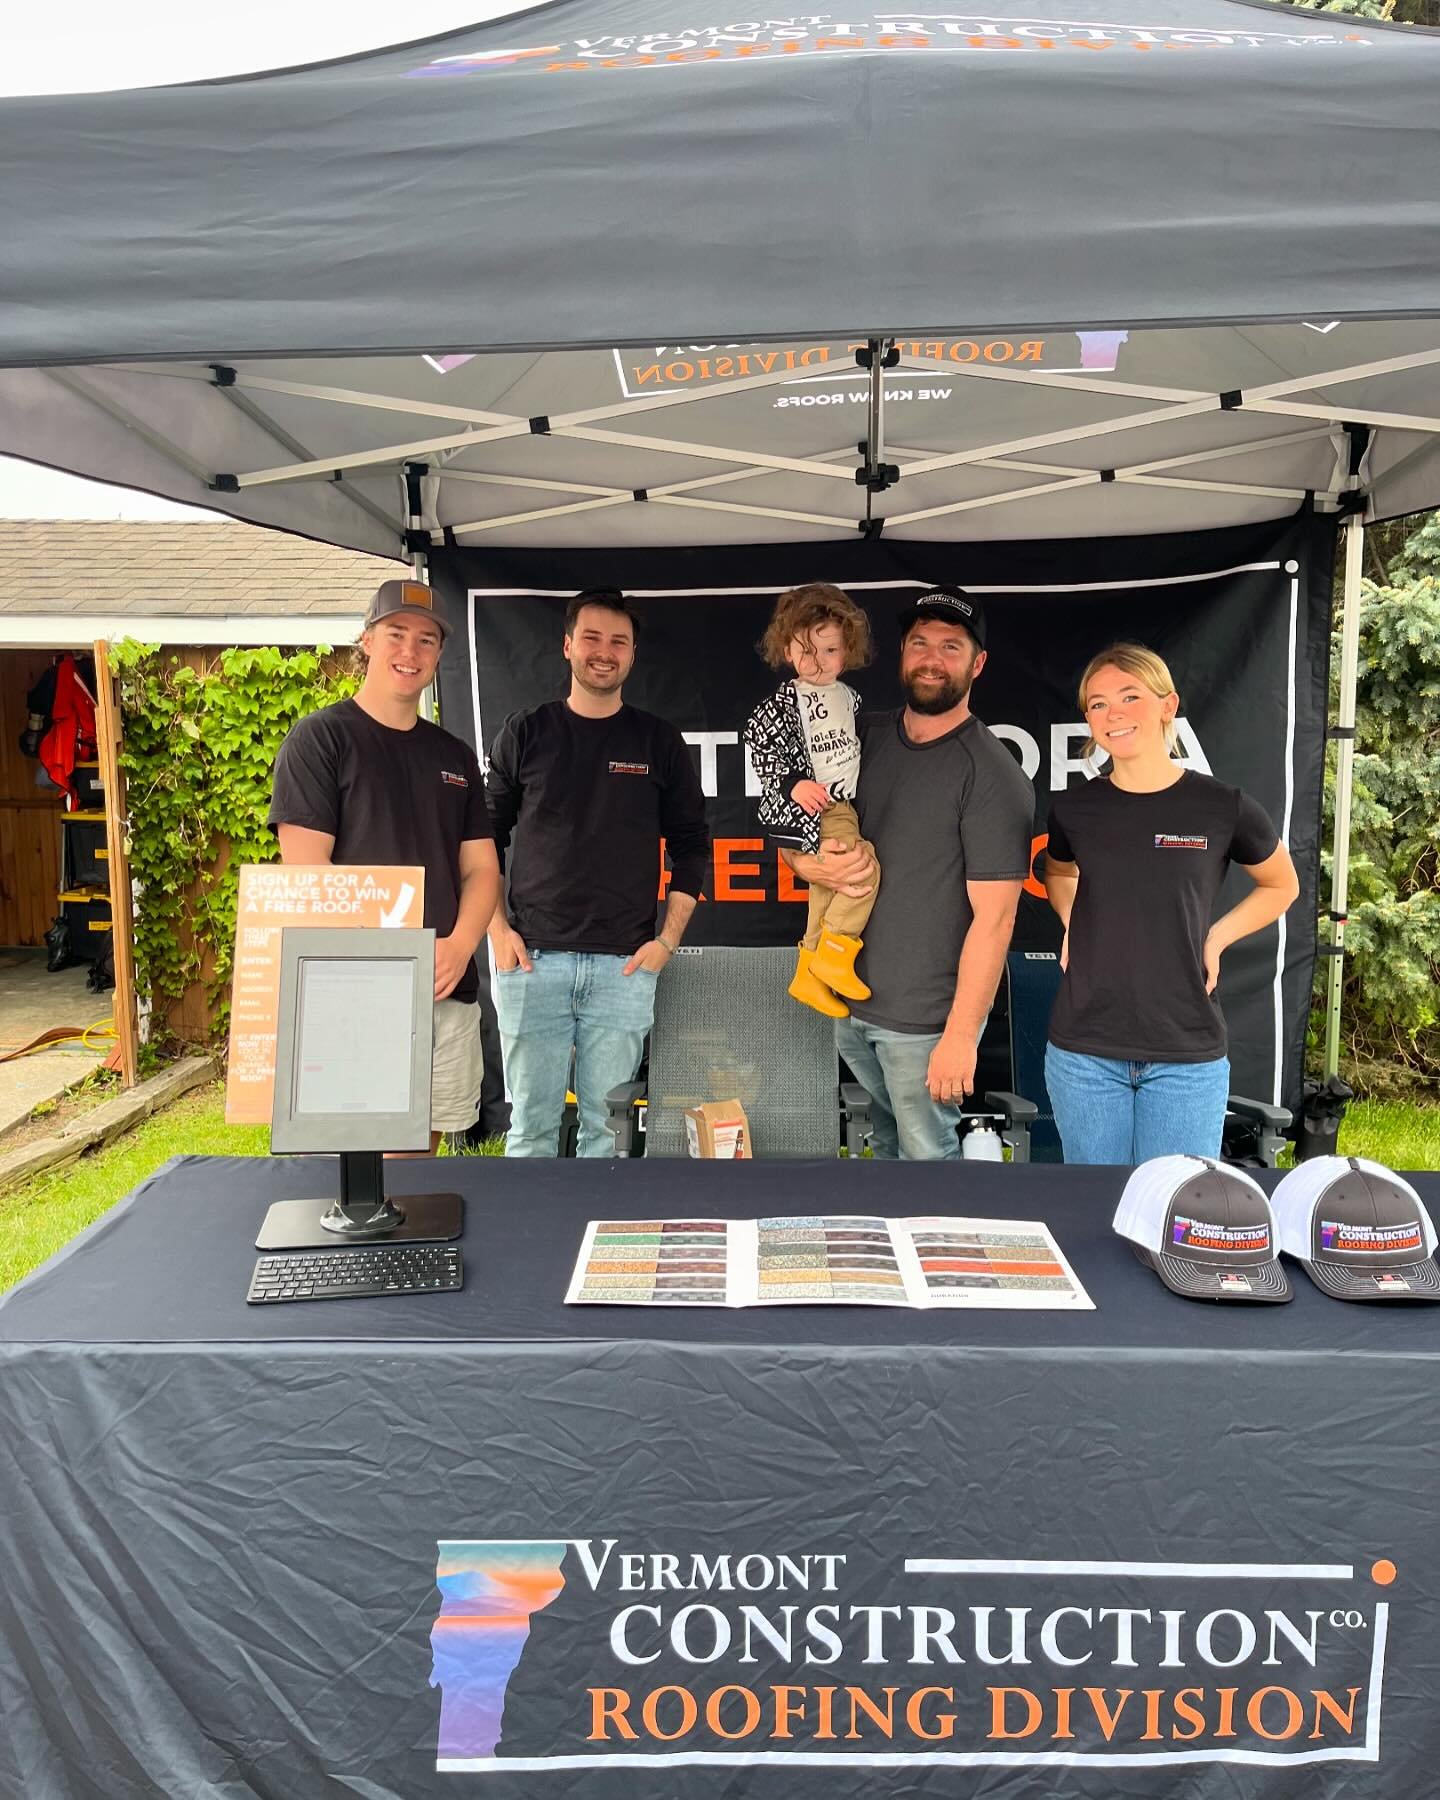 Today we&rsquo;d like to give a special shout out to our Kids Tent Sponsor Vermont Construction Company Roofing Division!

🏠 You&rsquo;ll find their friendly team at market on May 25, June 1, June 22 and June 29. Make sure you swing by for a chance 